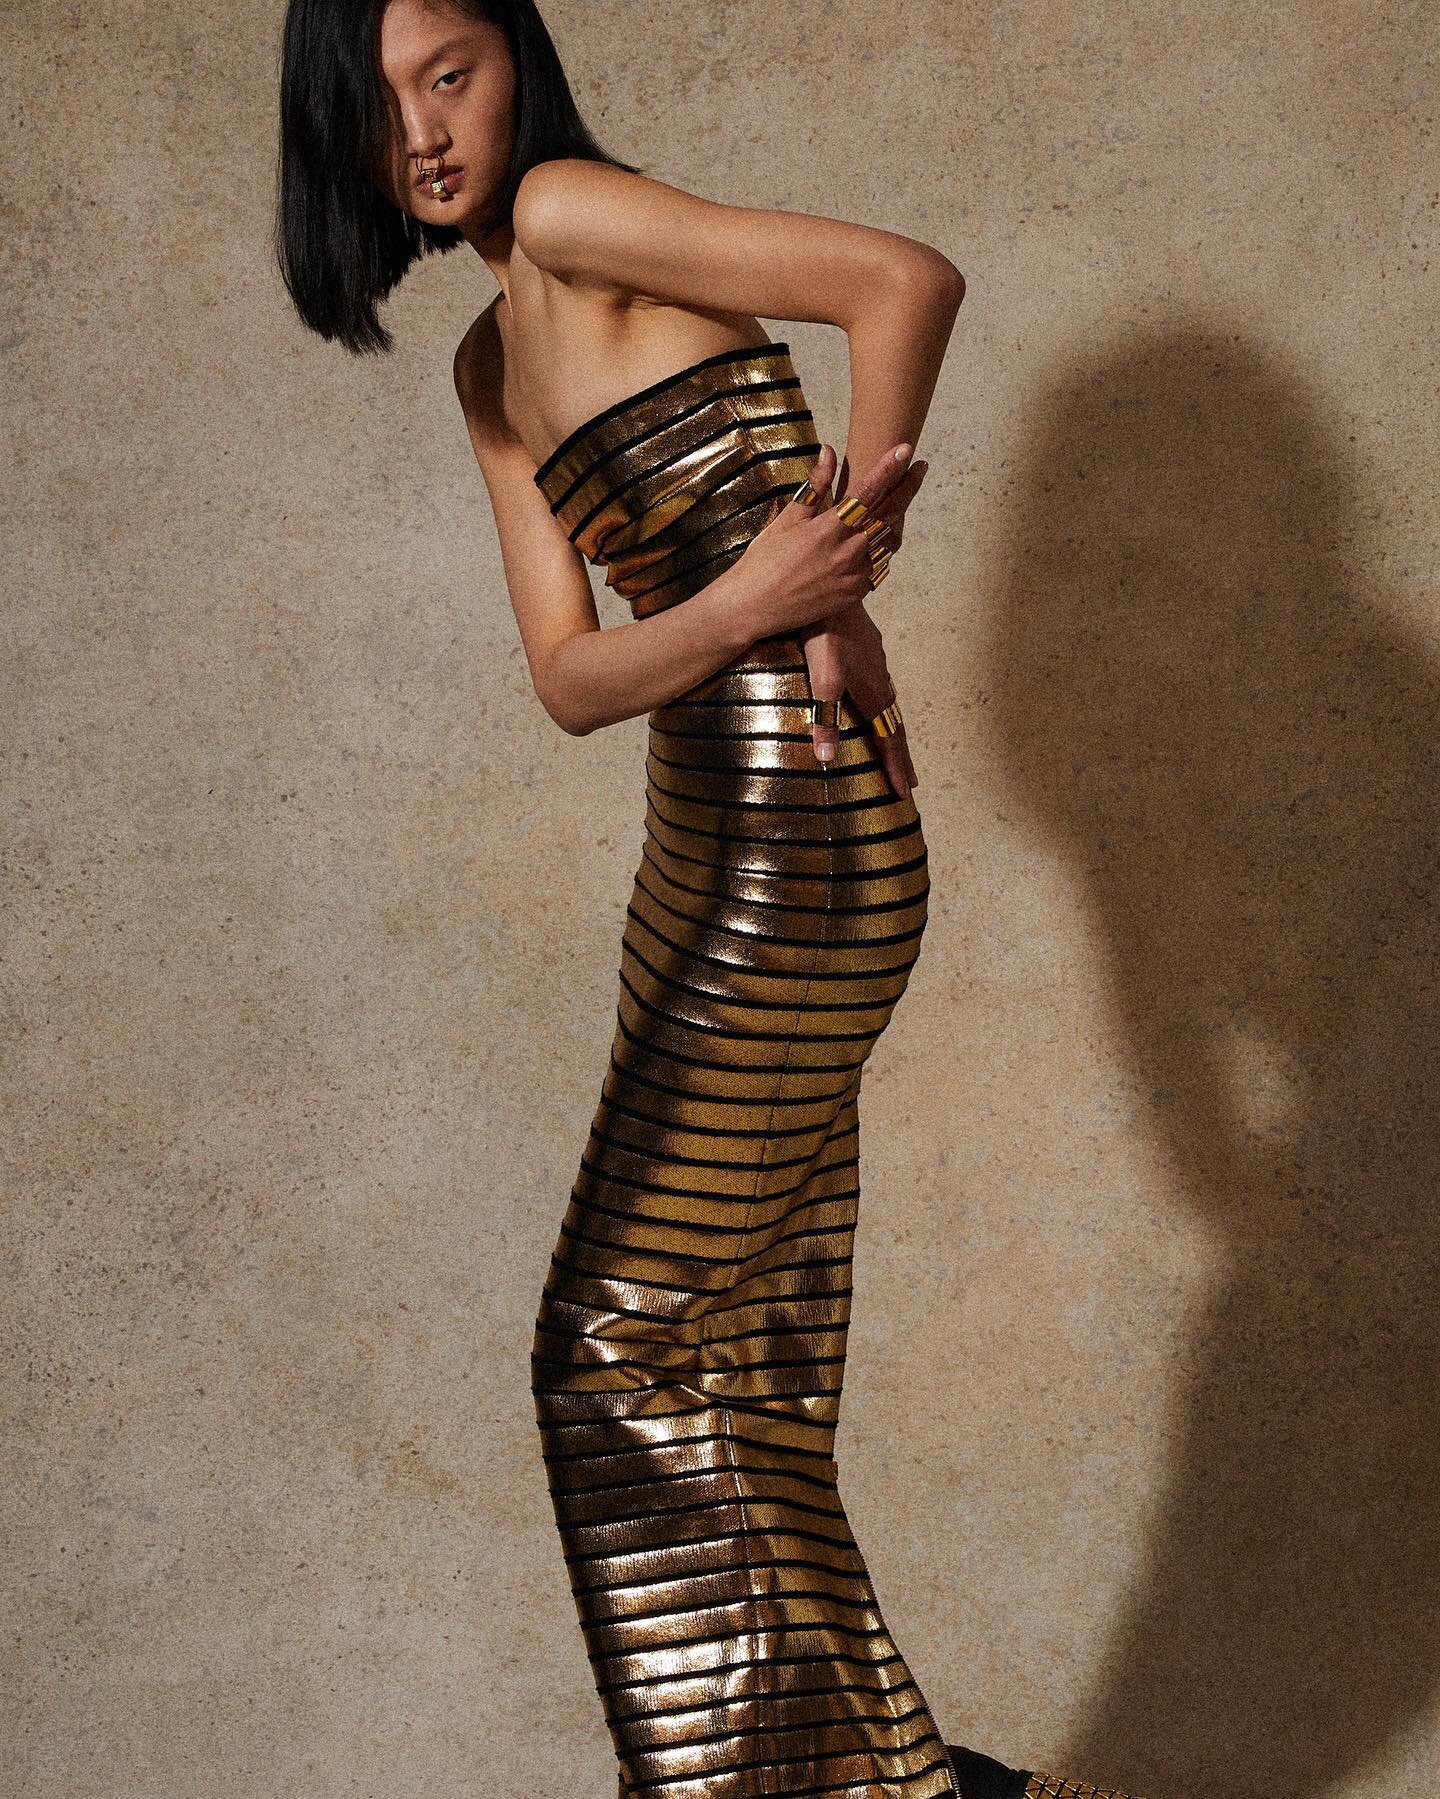 Balmain R2023 inspired by ancient Egypt